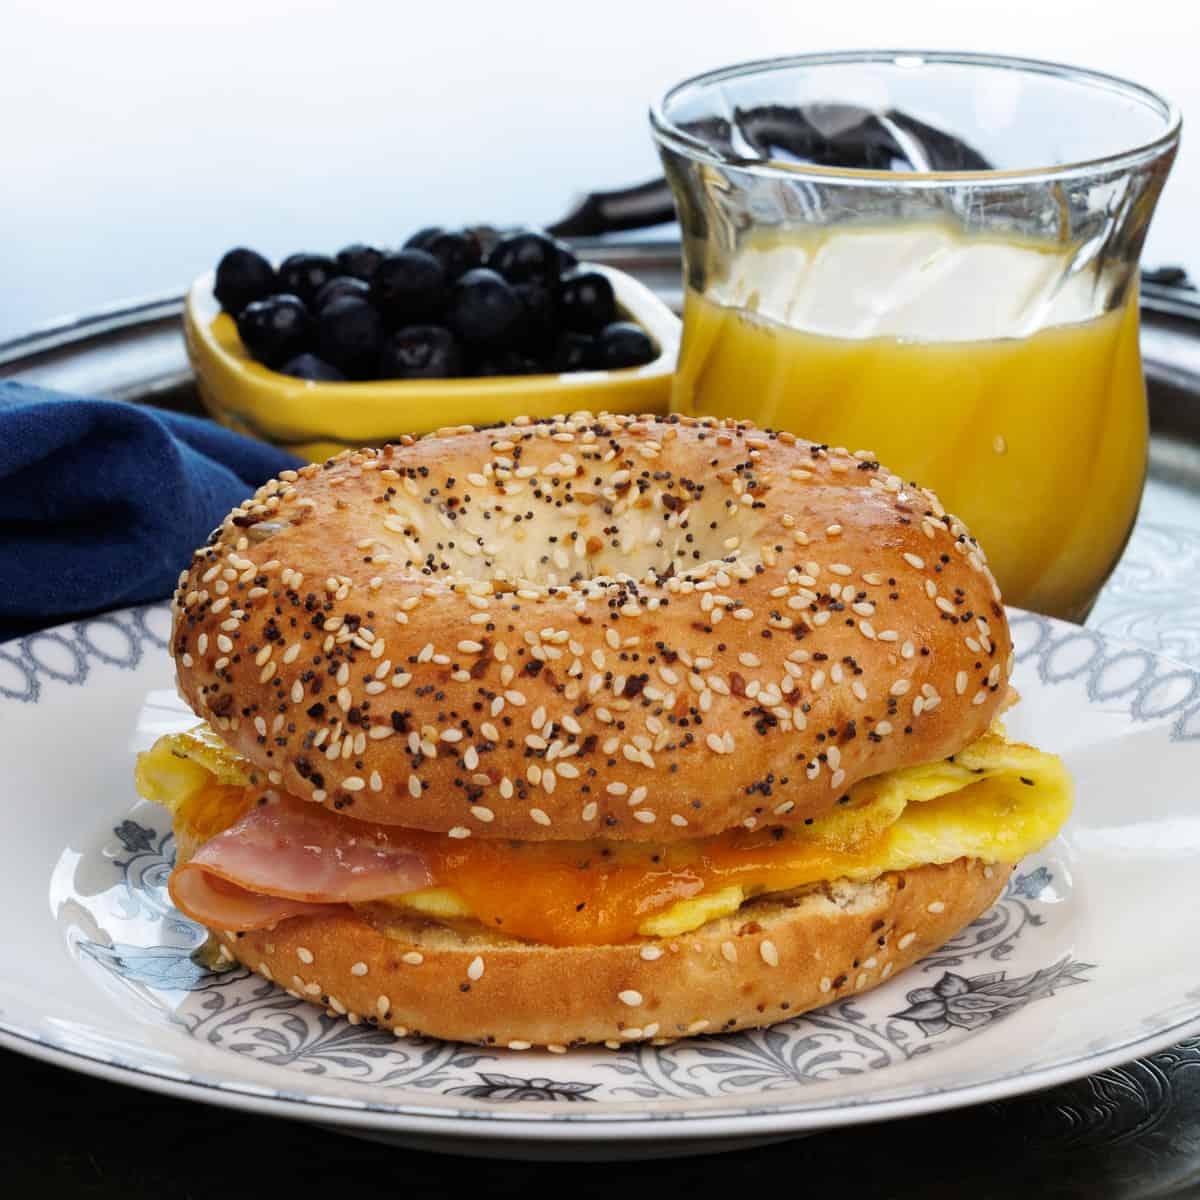 a ham and cheese breakfast bagel on a white plate next to a bowl of blueberries.